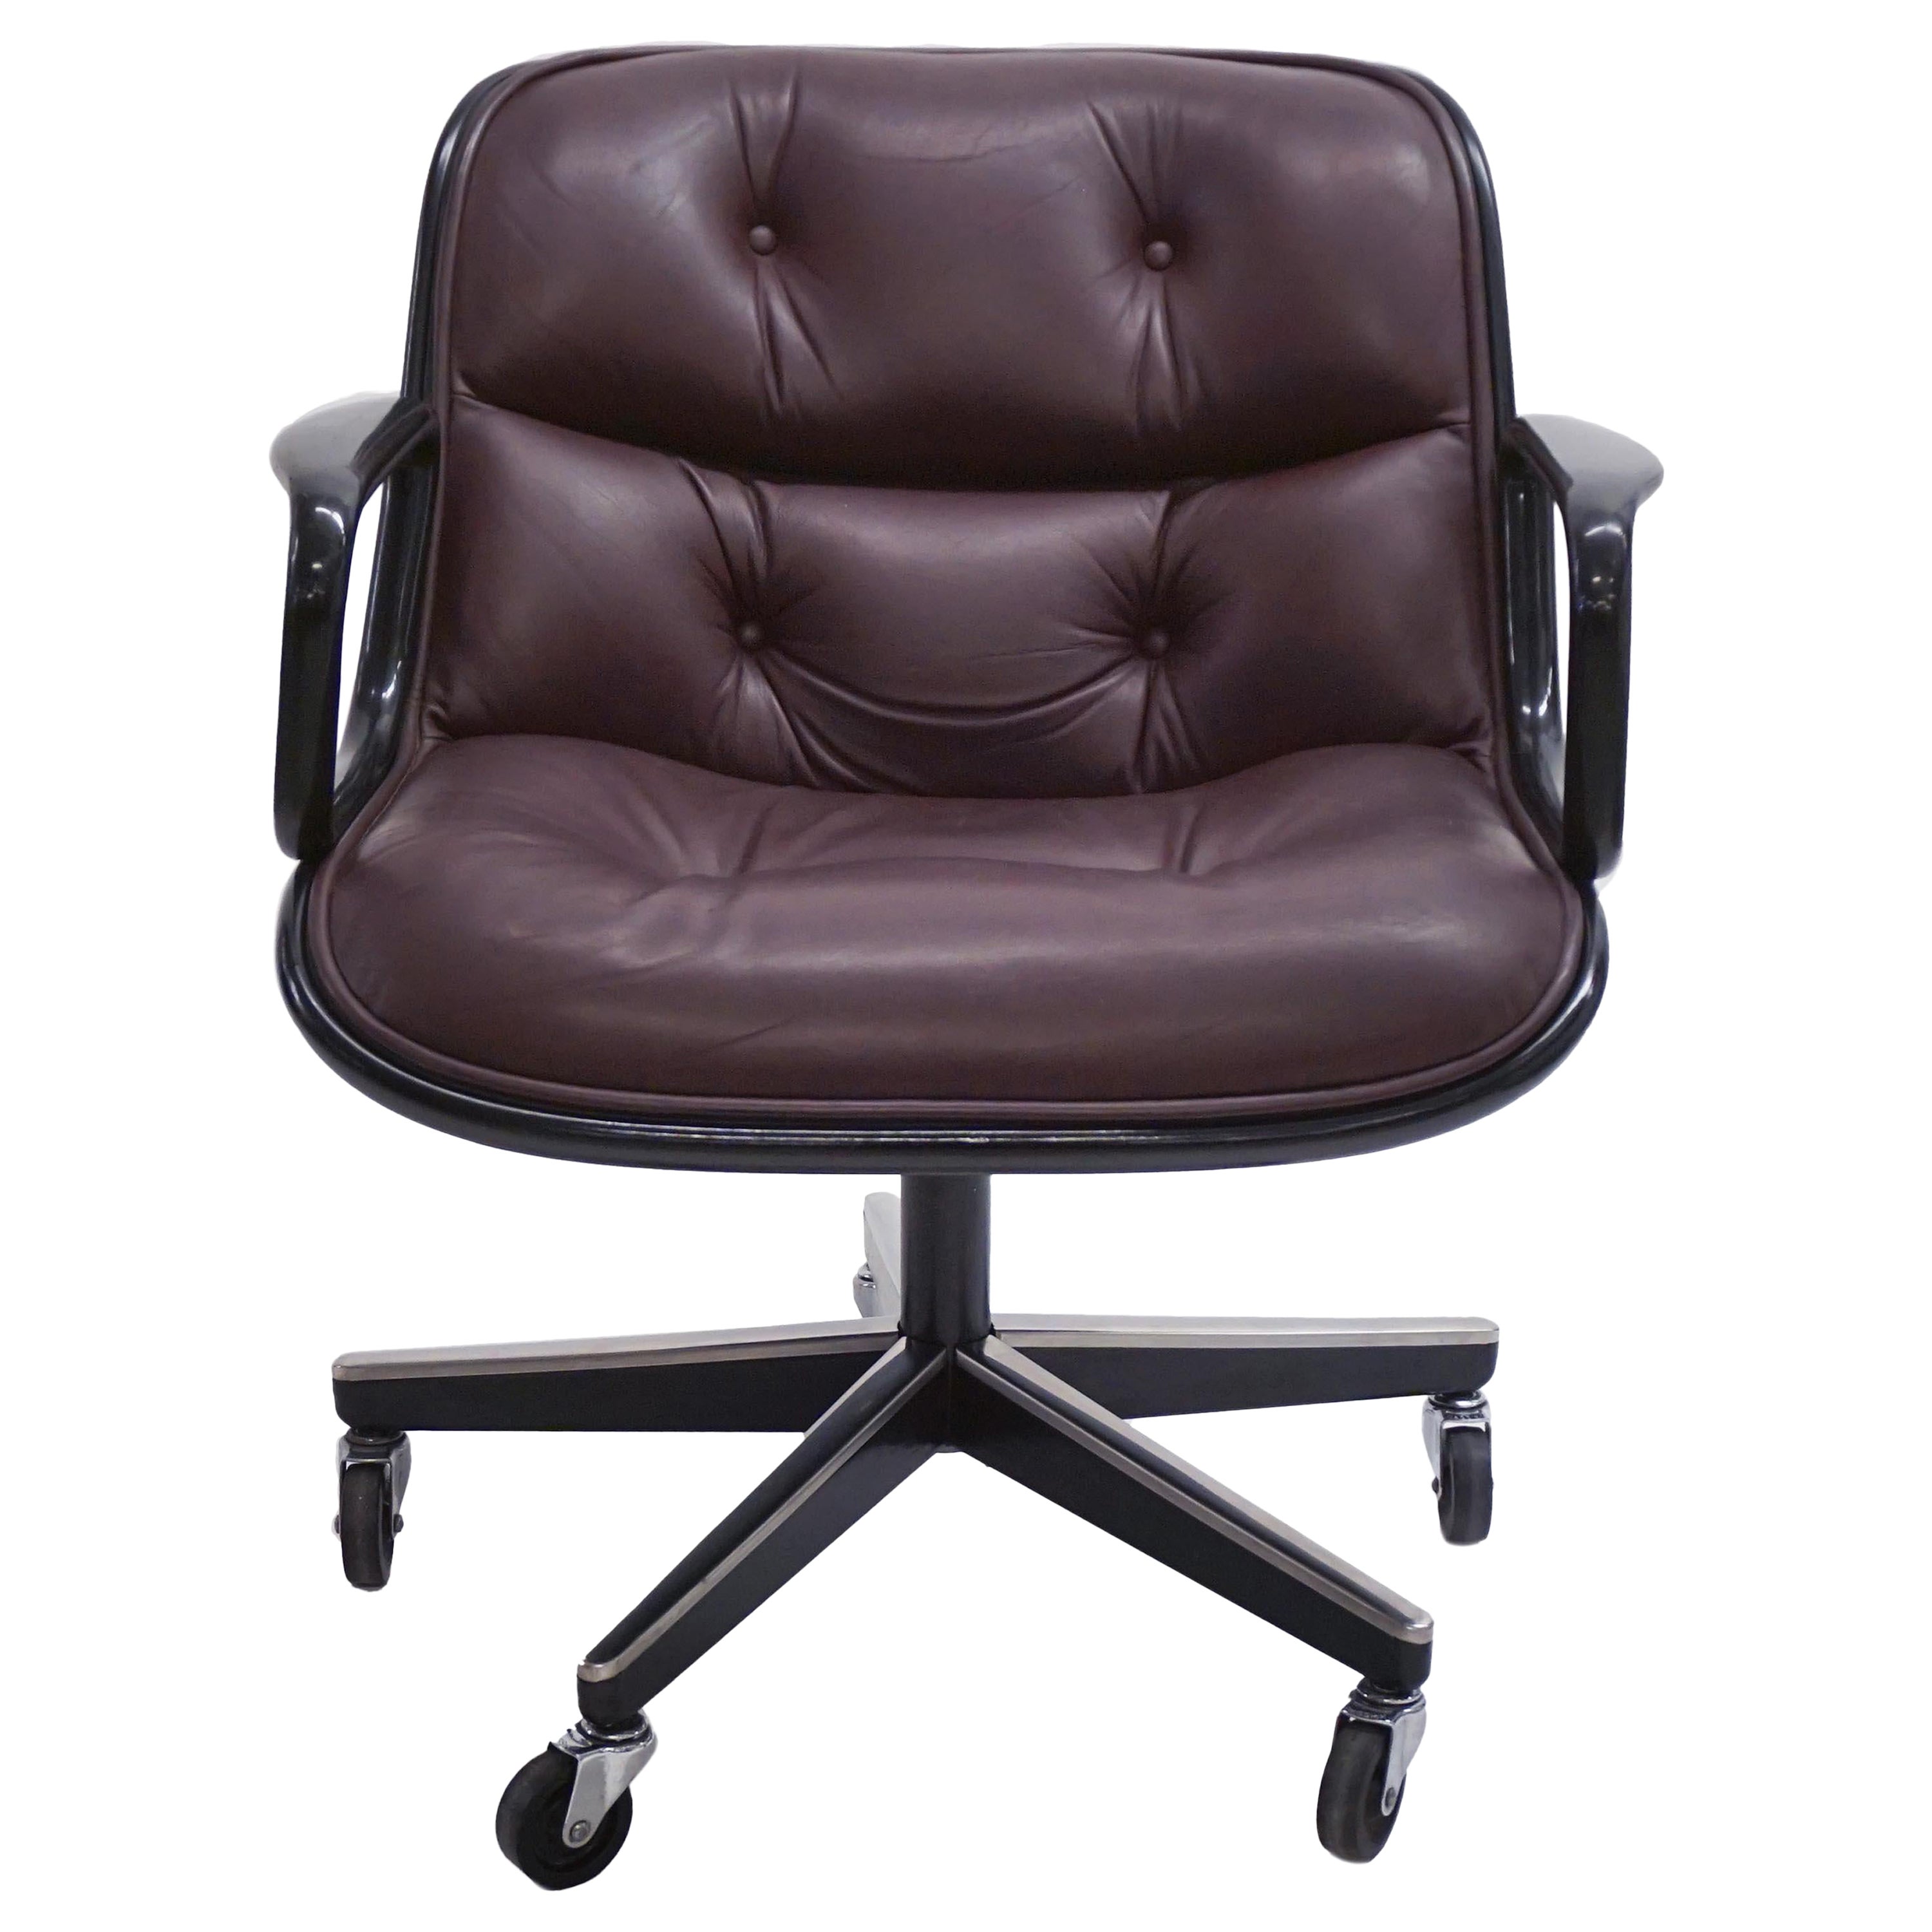 Knoll Pollock Executive Chair in Aubergine Leather, Matte Black Frame For Sale